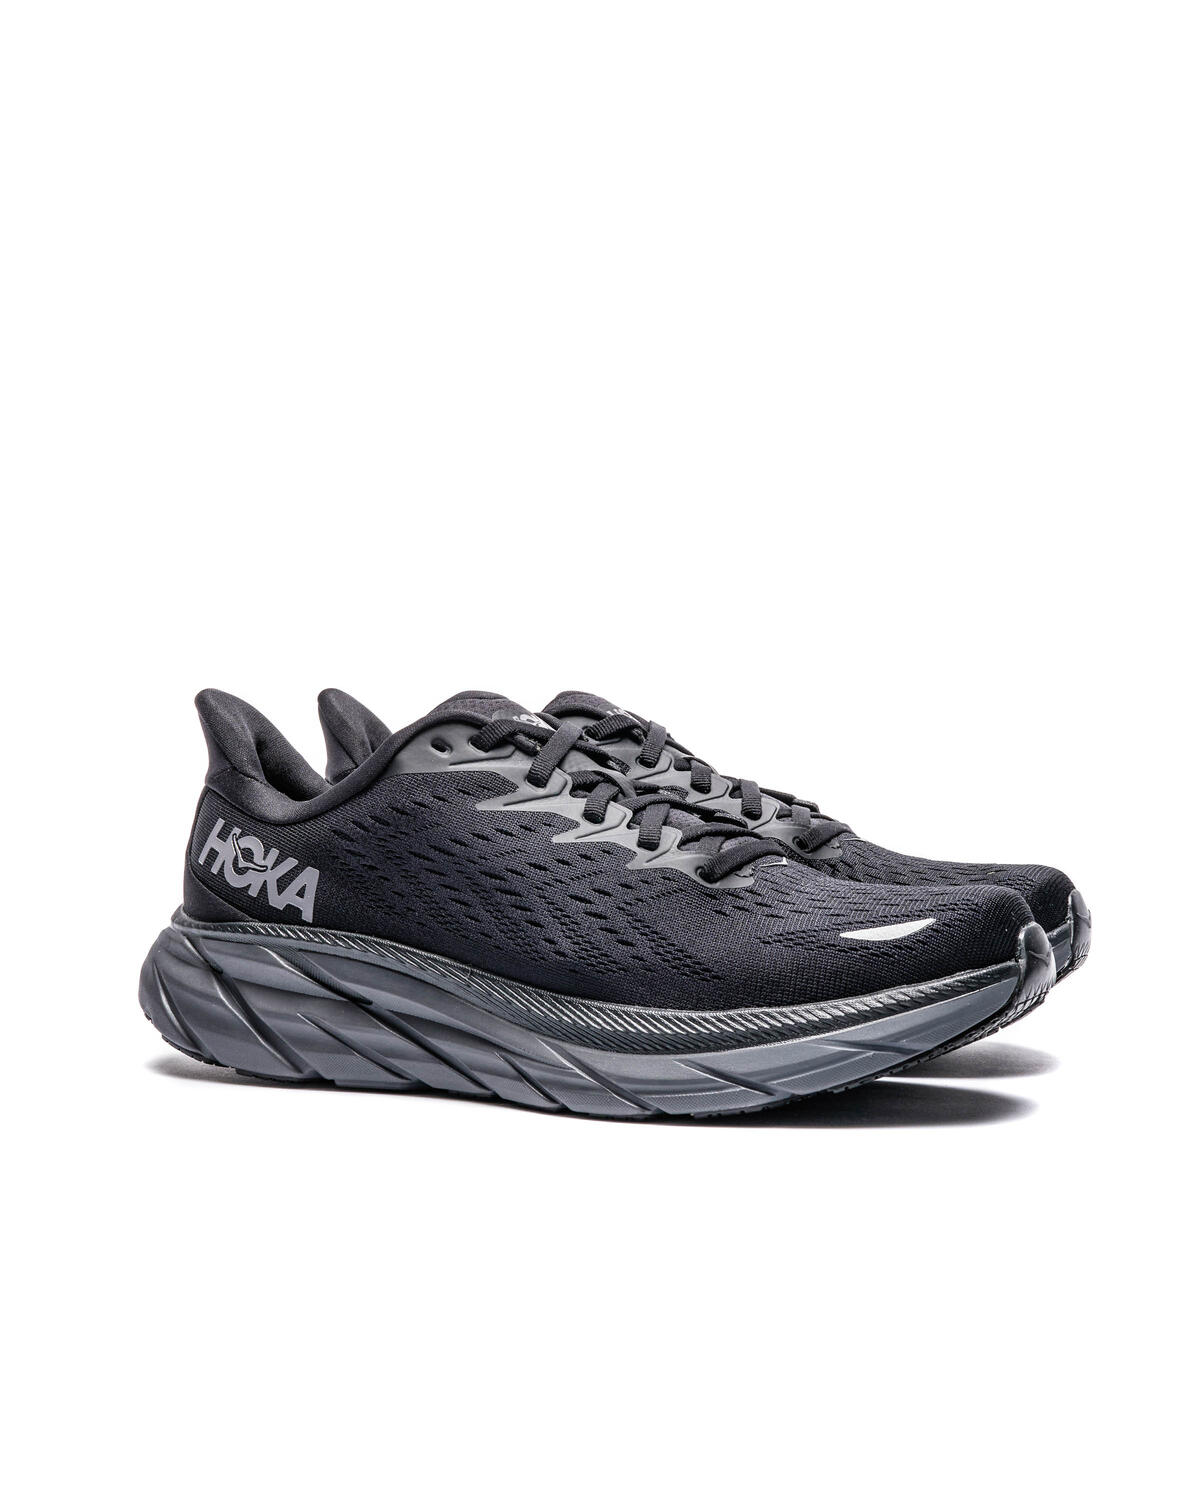 Hoka One One CLIFTON 8 | 1119393-BBLC | AFEW STORE